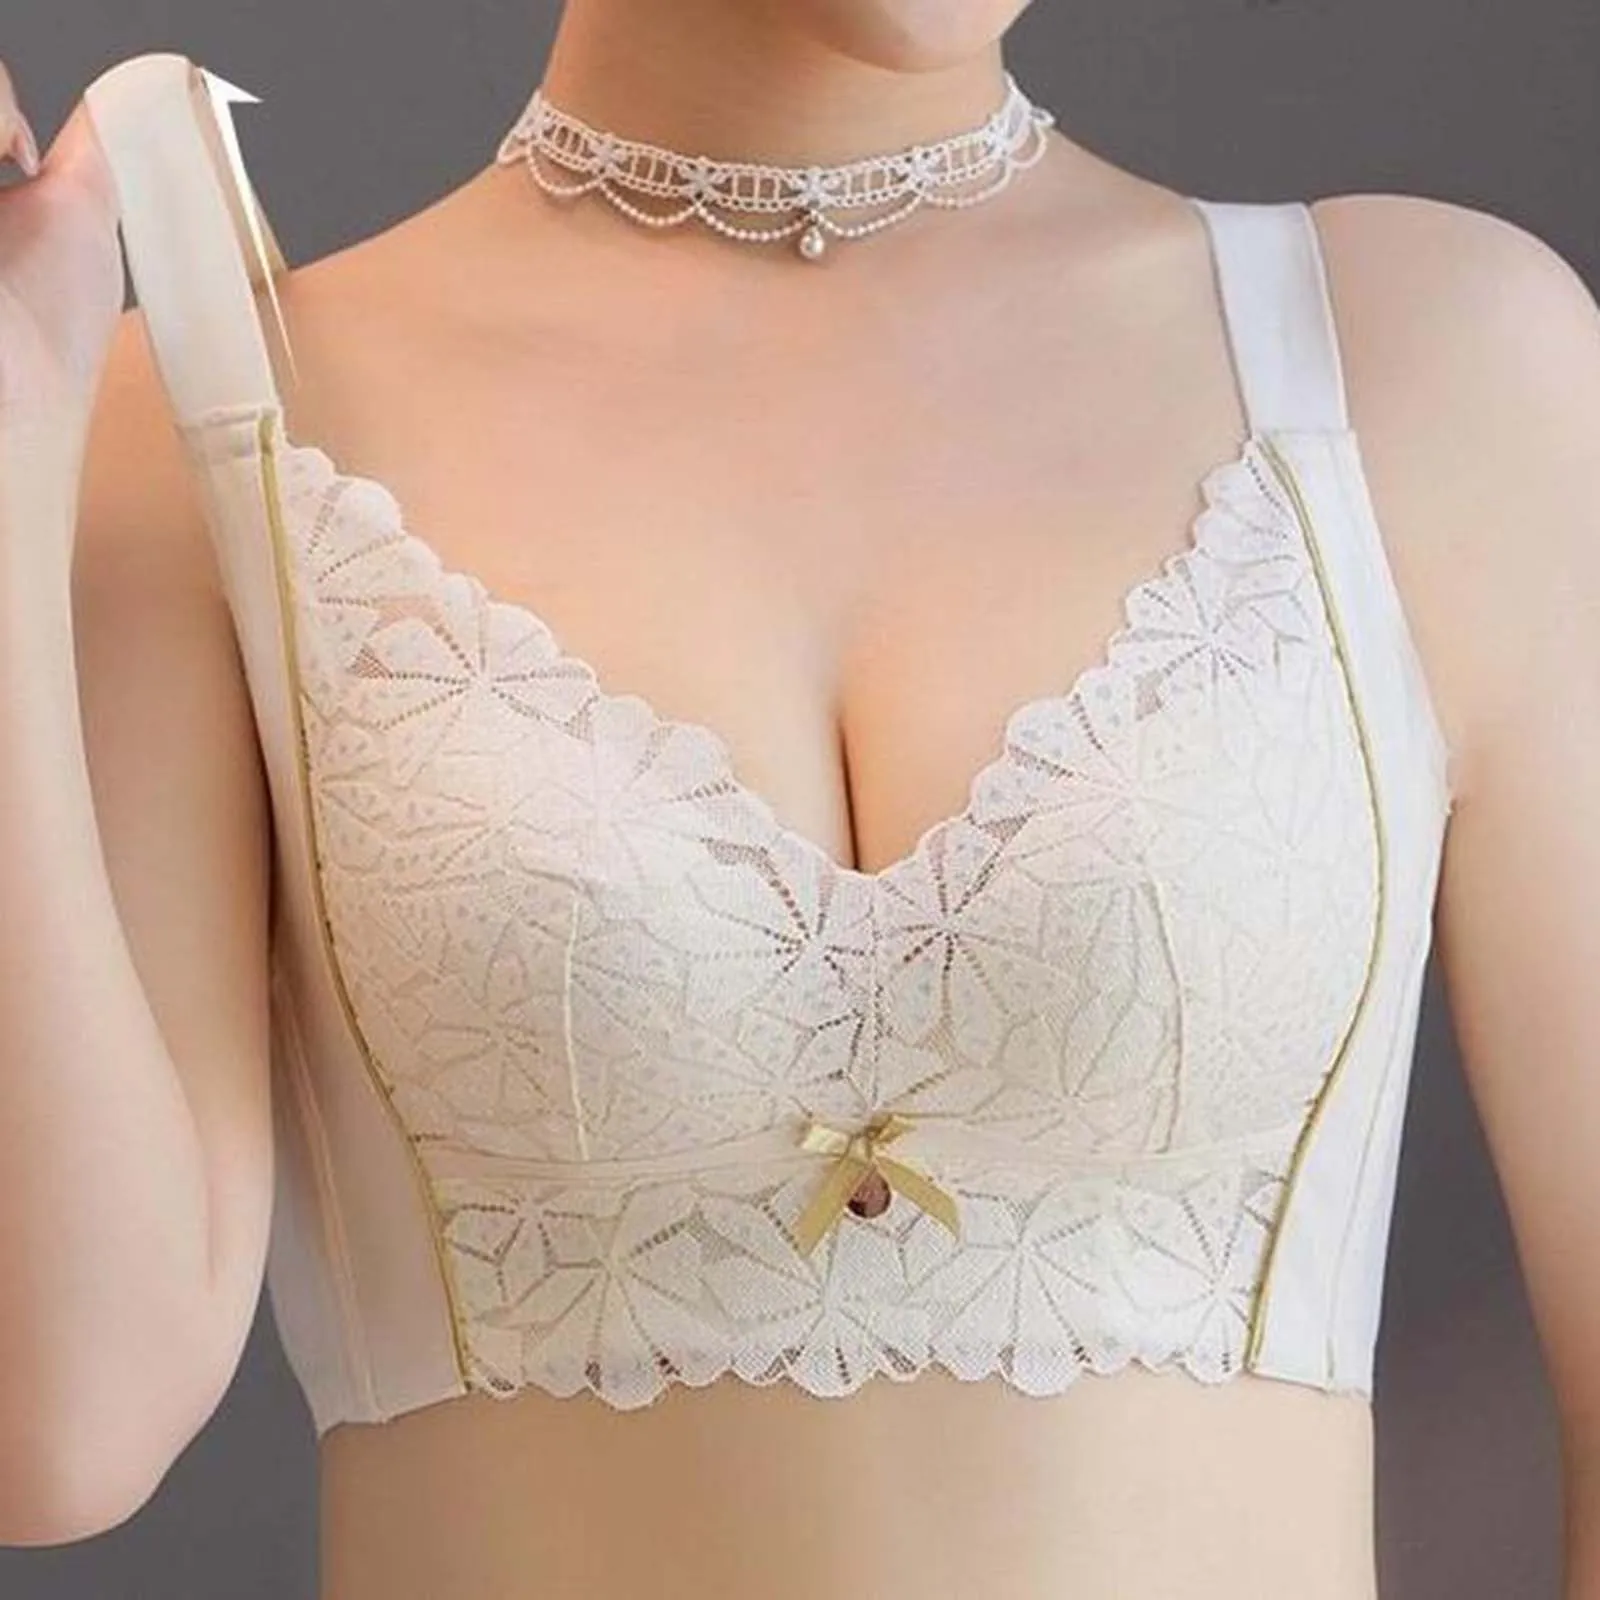 

Latex Underwear Women's Full Cup Gather Up Side Breast Bra No Steel Ring Adjustable Top Rest Thin Lace Bra Workout Sports Bras